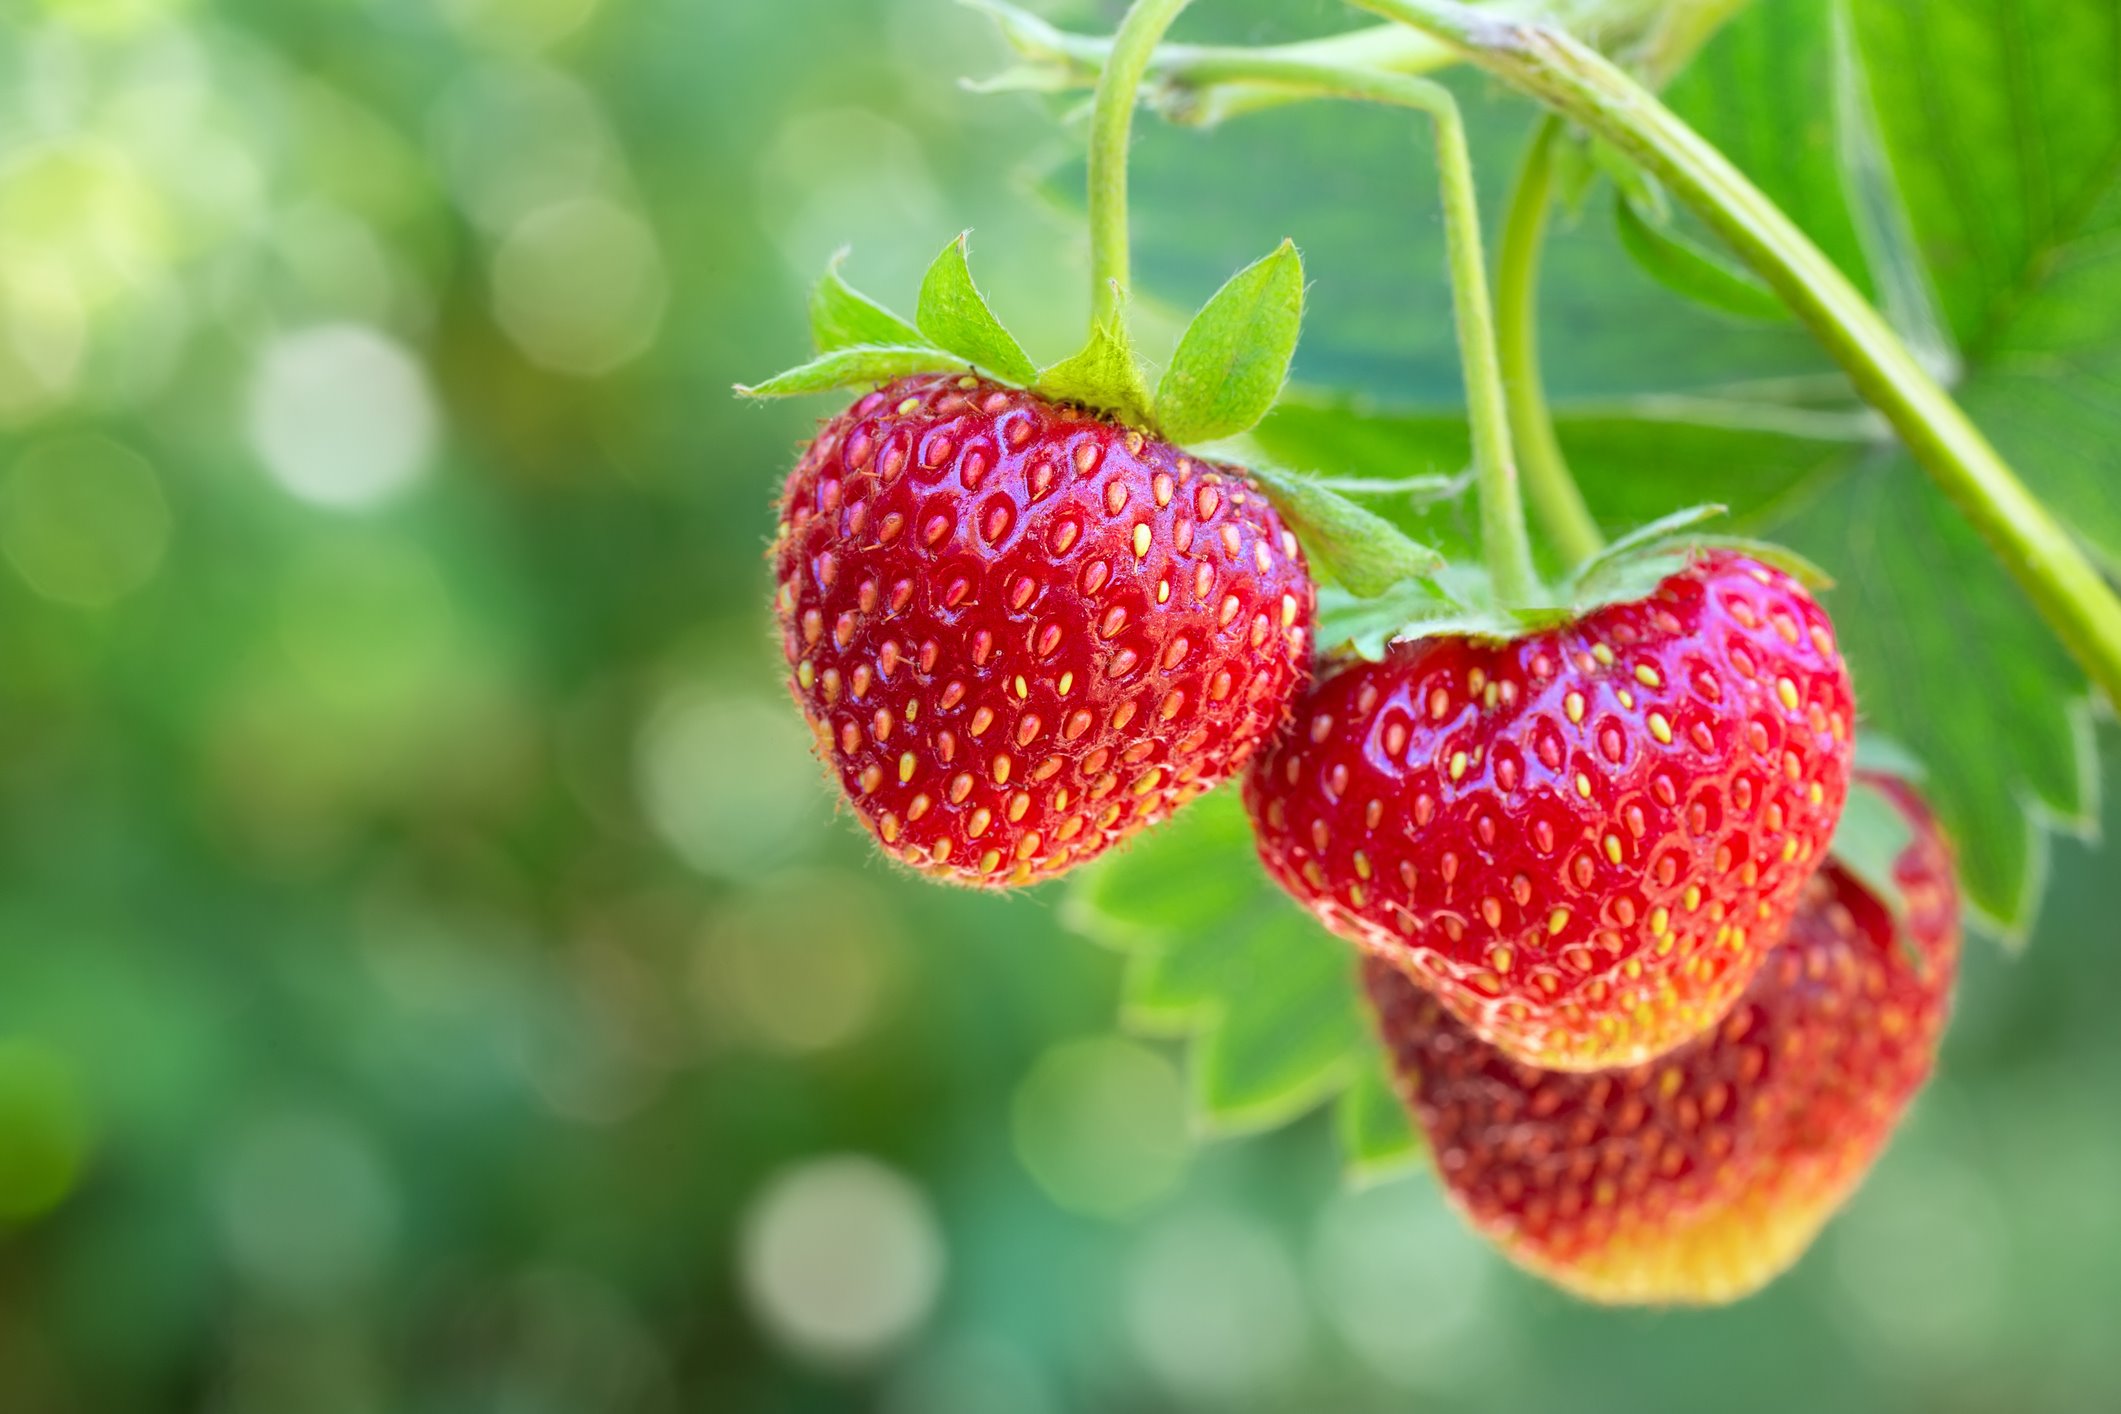 How To Prepare Strawberry Seeds For Planting